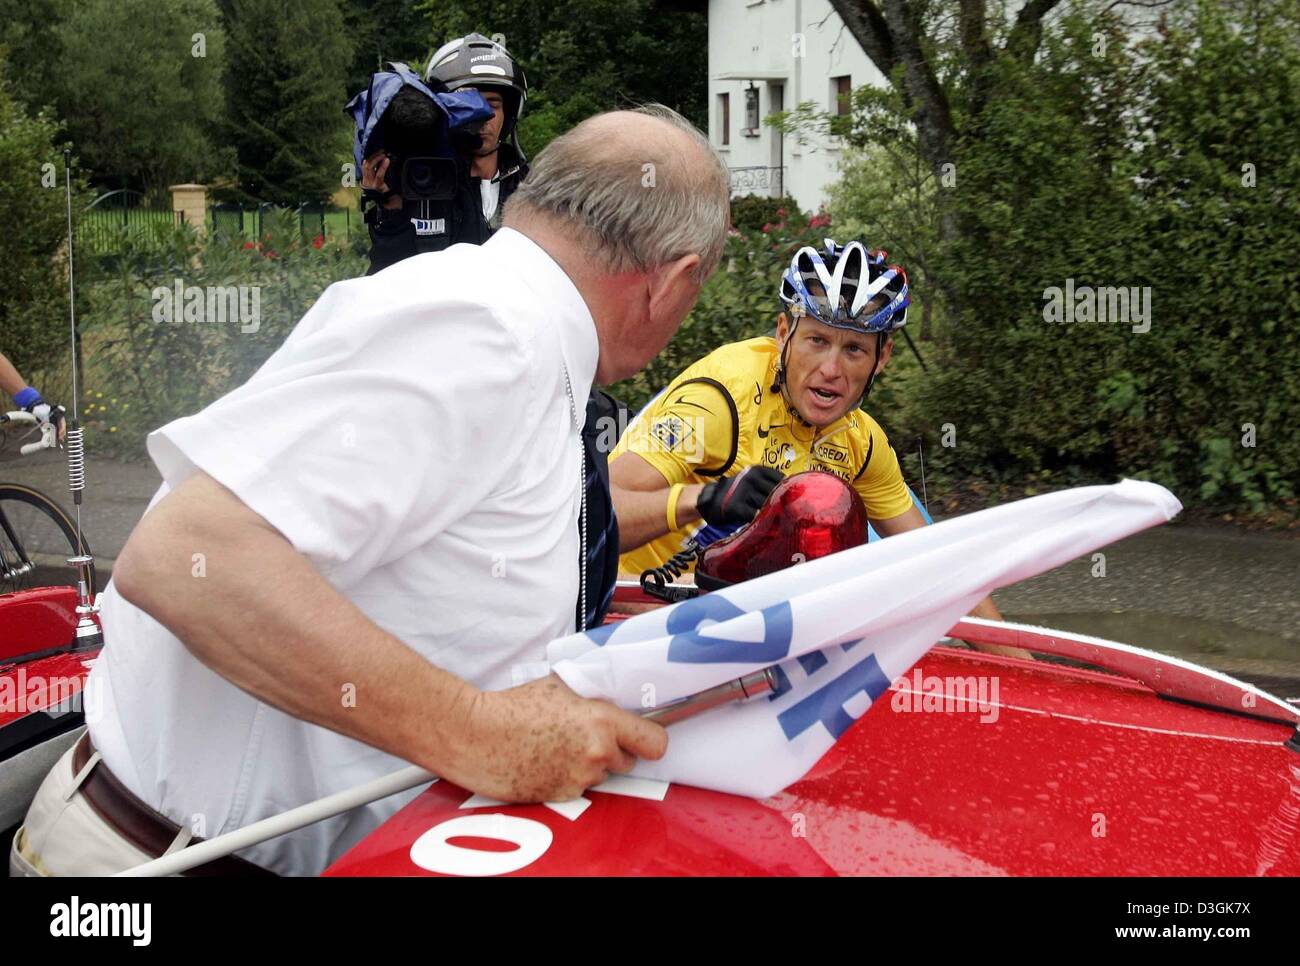 (dpa) - US cyclist and five time Tour winner Lance Armstrong (R) of Team US Postal Service talks to Tour director Jean-Marie Leblanc prior to the start of the 18th stage of the Tour de France in Annemasse, France, 23 July 2004. The 18th stage covers a distance of 166,5 km from Annemasse to Lons-le-Saunier. Stock Photo